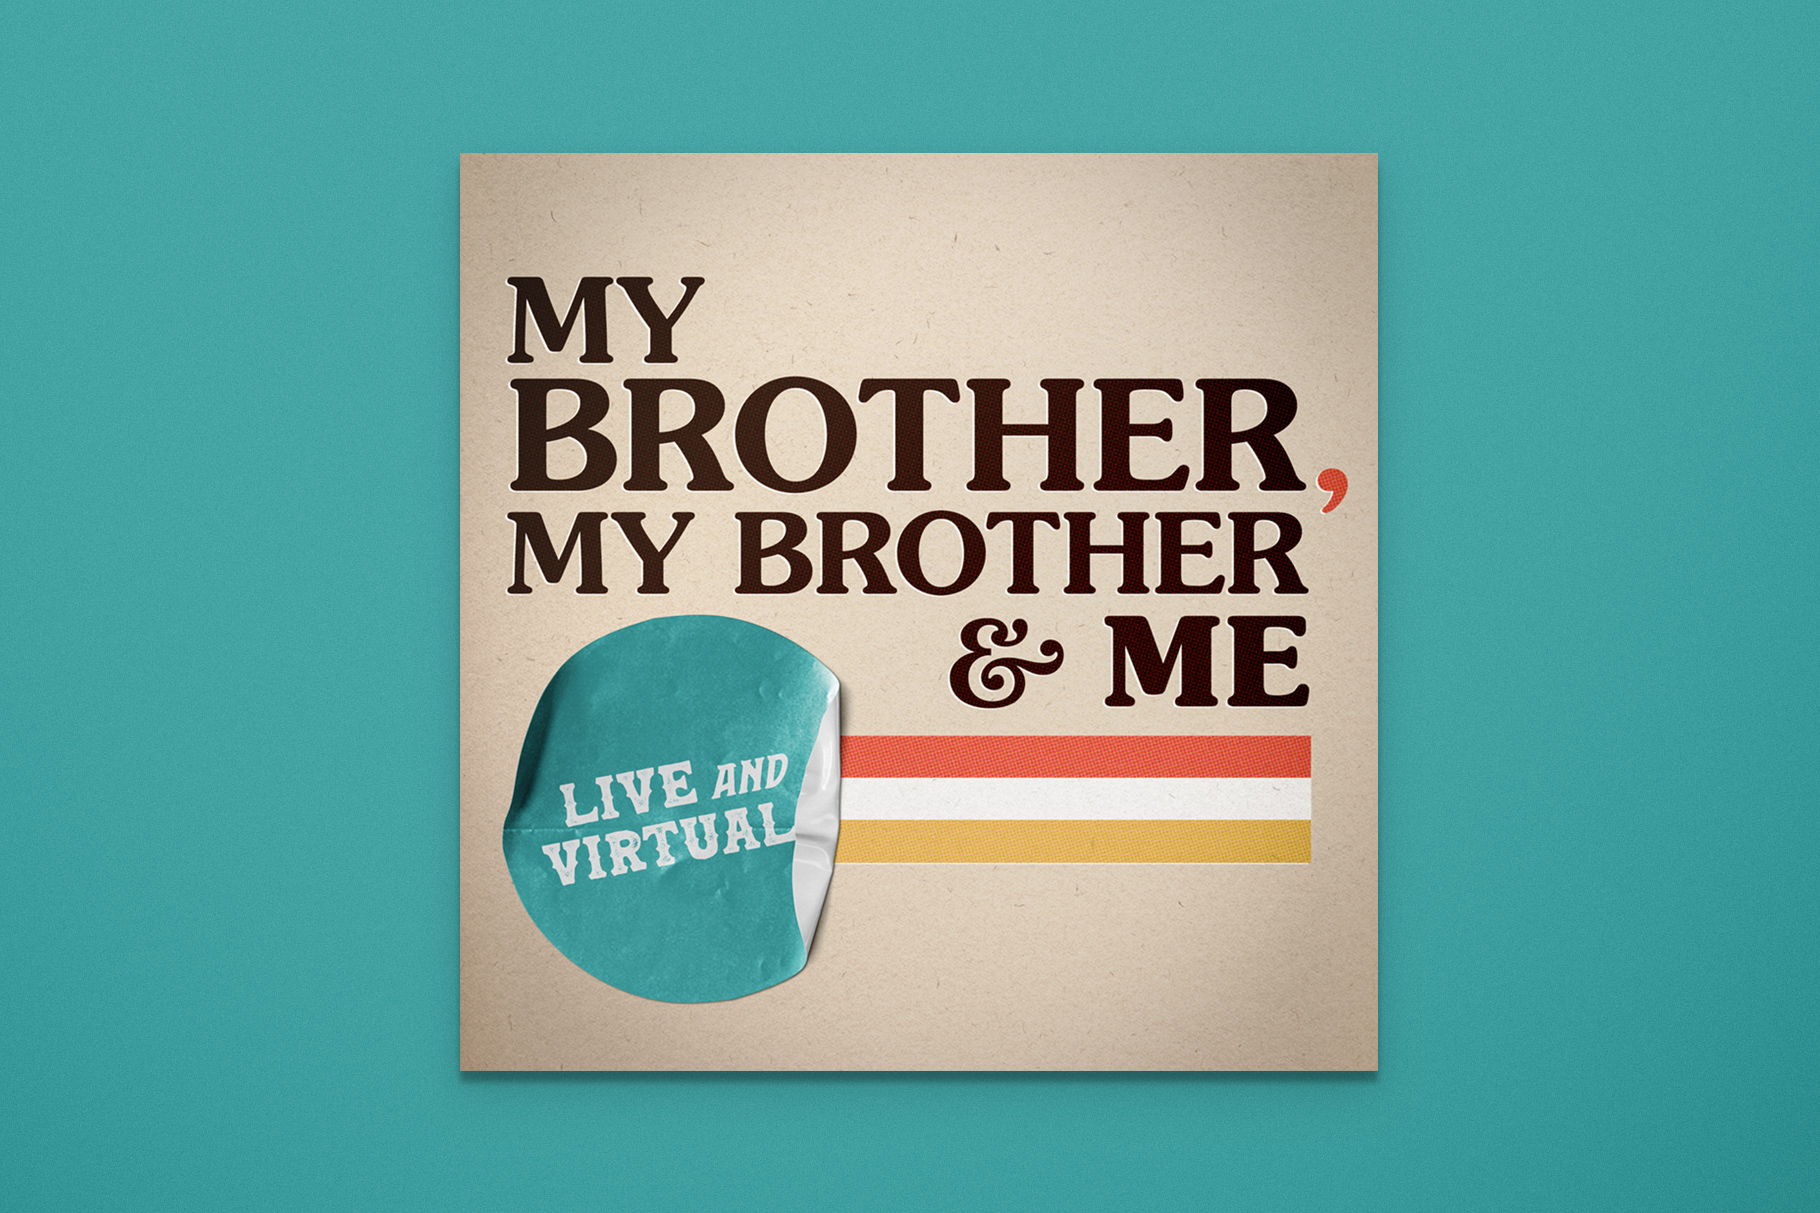 The MBMBaM logo reads “My Brother My Brother &amp; Me” in brown text on a square, light brown background. Below it to the left is an aqua circle with the text “Live and Virtual”. Extending right from the circle are stripes in orange, white, and yellow. The overall background is aqua.